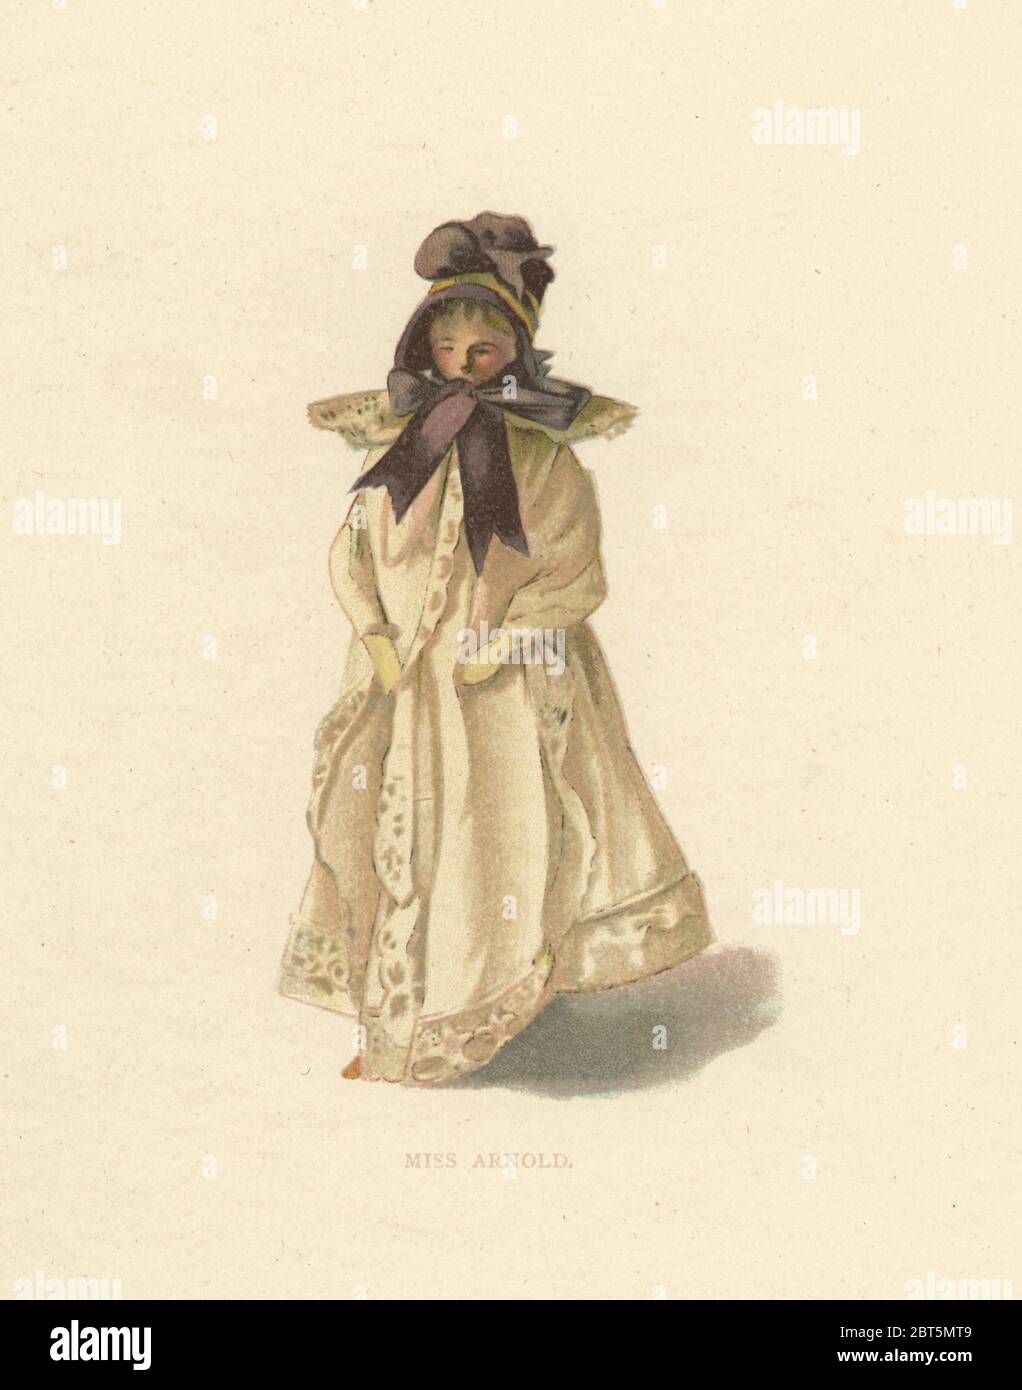 Doll representing Miss Arnold in poke bonnet, muslin frock, long fichu. Wooden doll dressed by the young Princess Victoria. Color plate after an illustration by Alan Wright from Frances H. Lows Queen Victorias Dolls, George Newness, London, 1894. Stock Photo